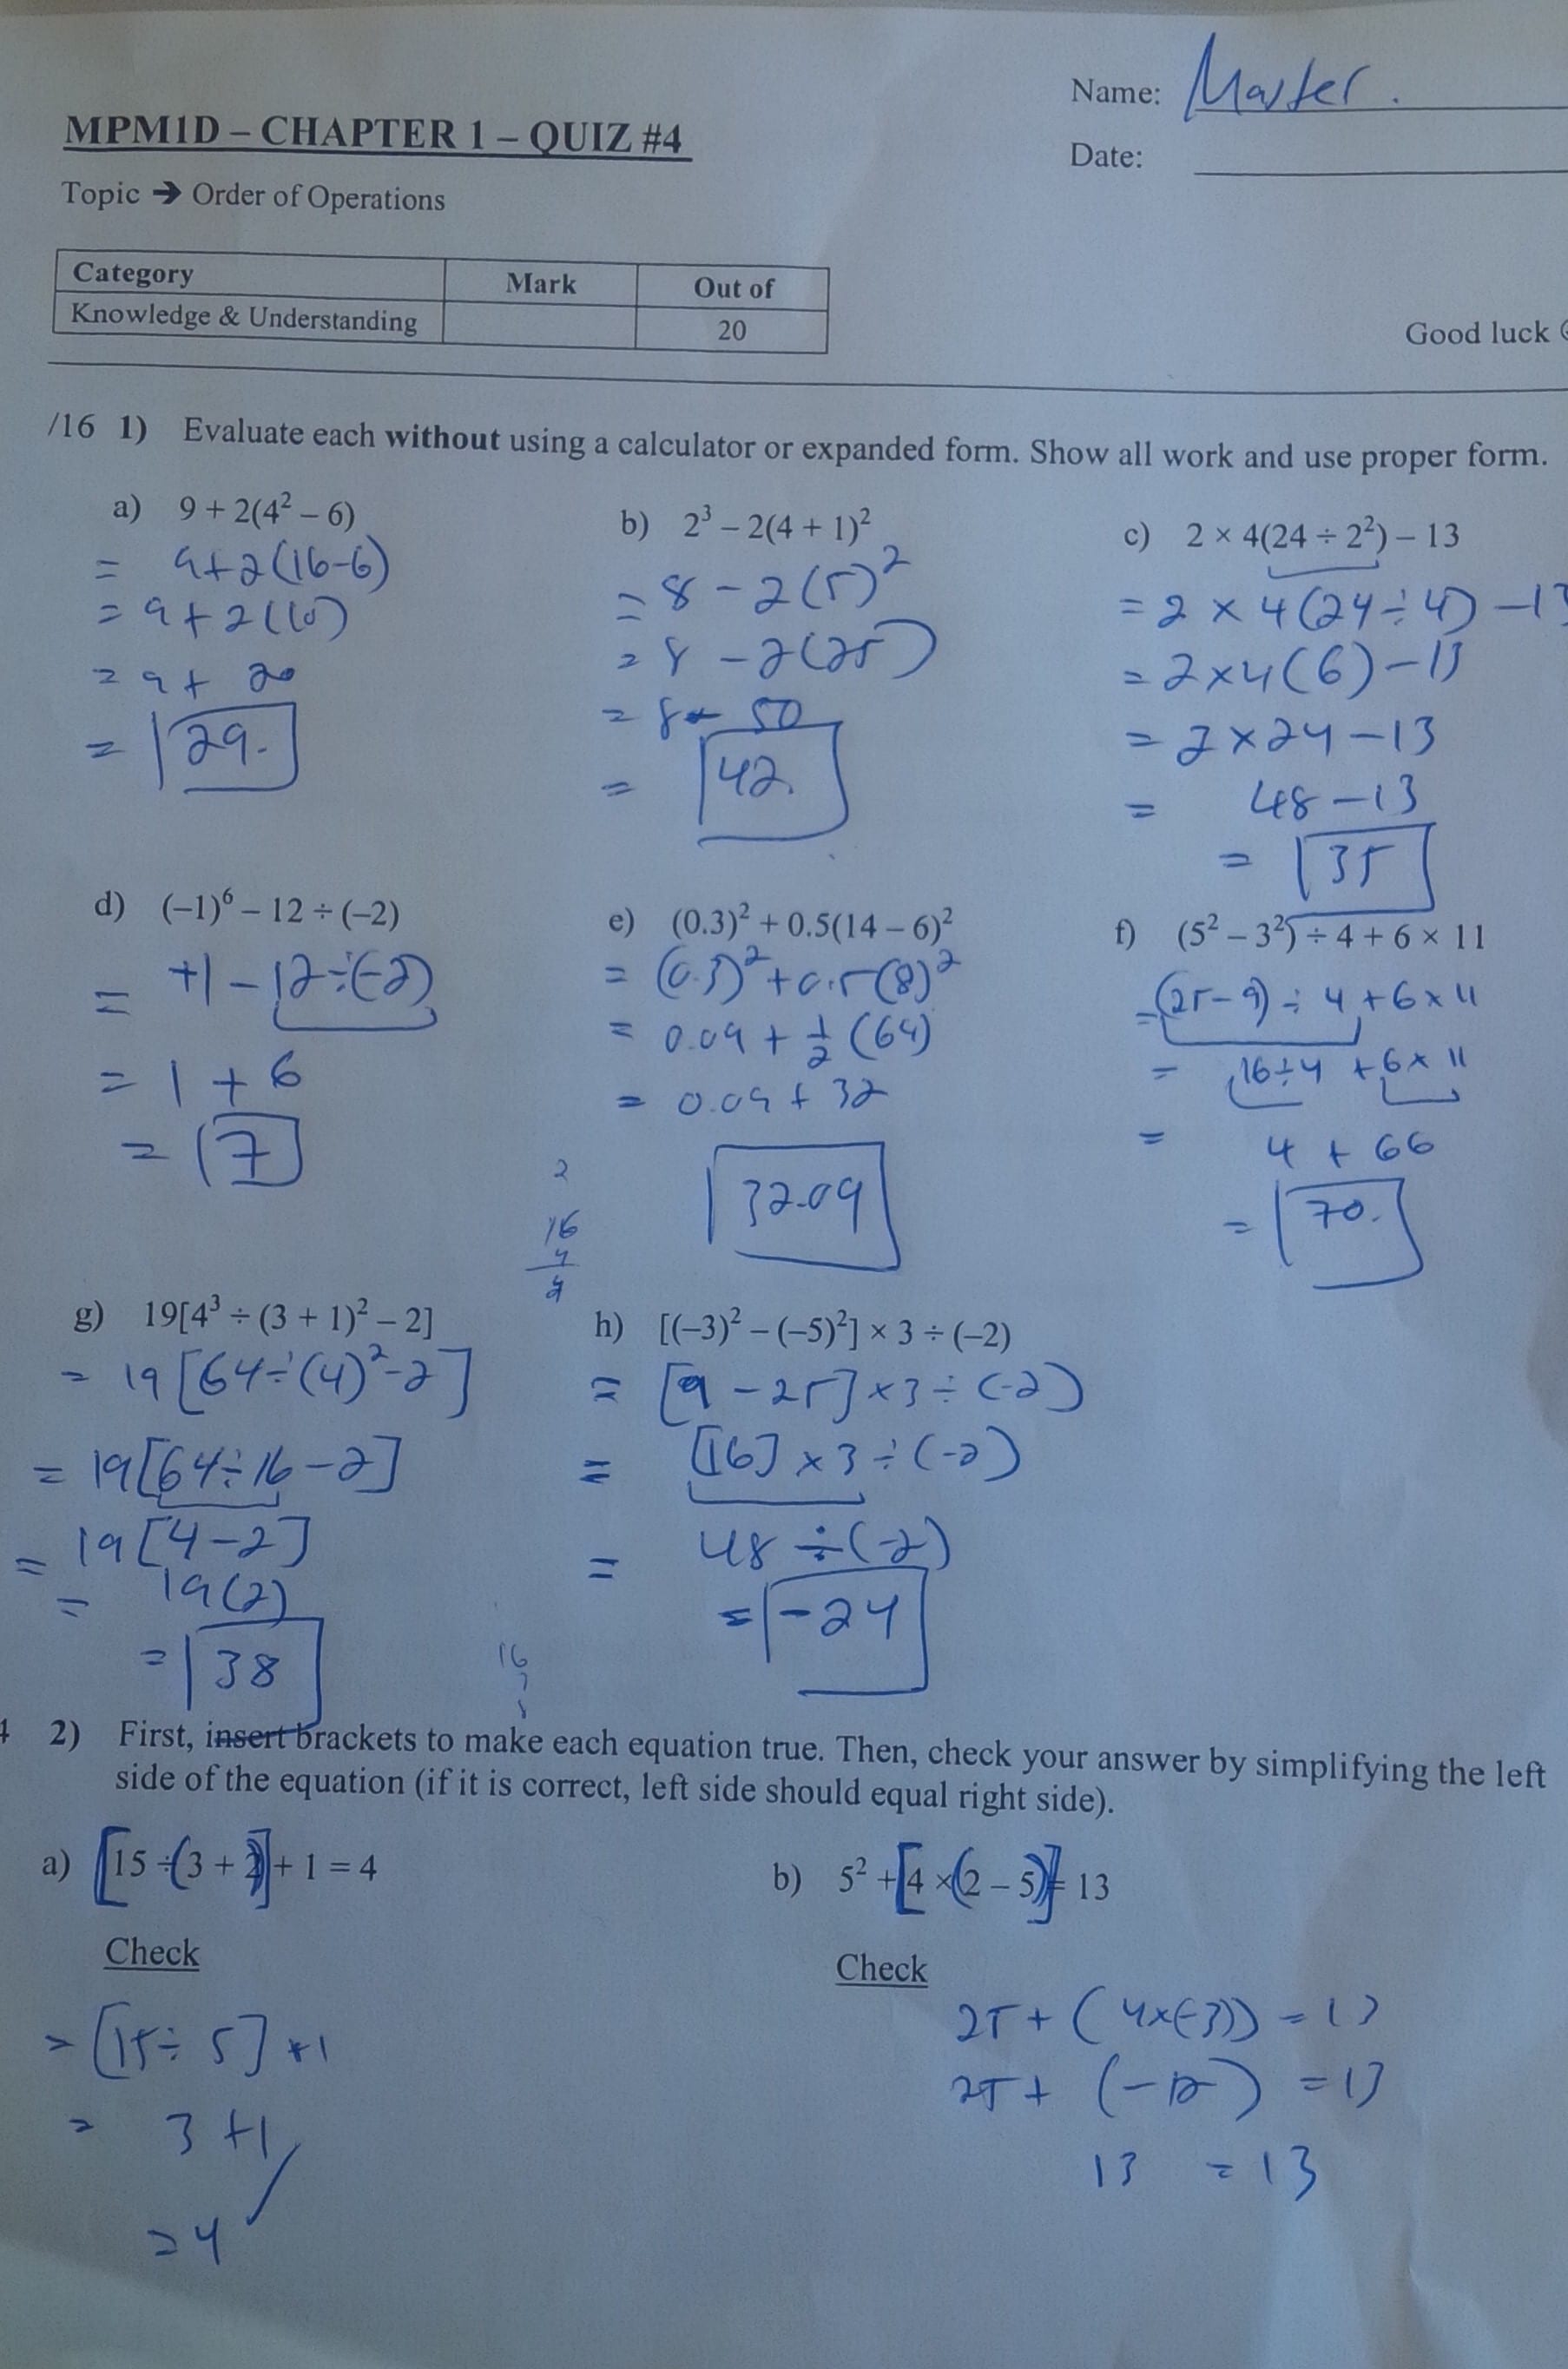 math-154b-completing-the-square-worksheet-answers-db-excel